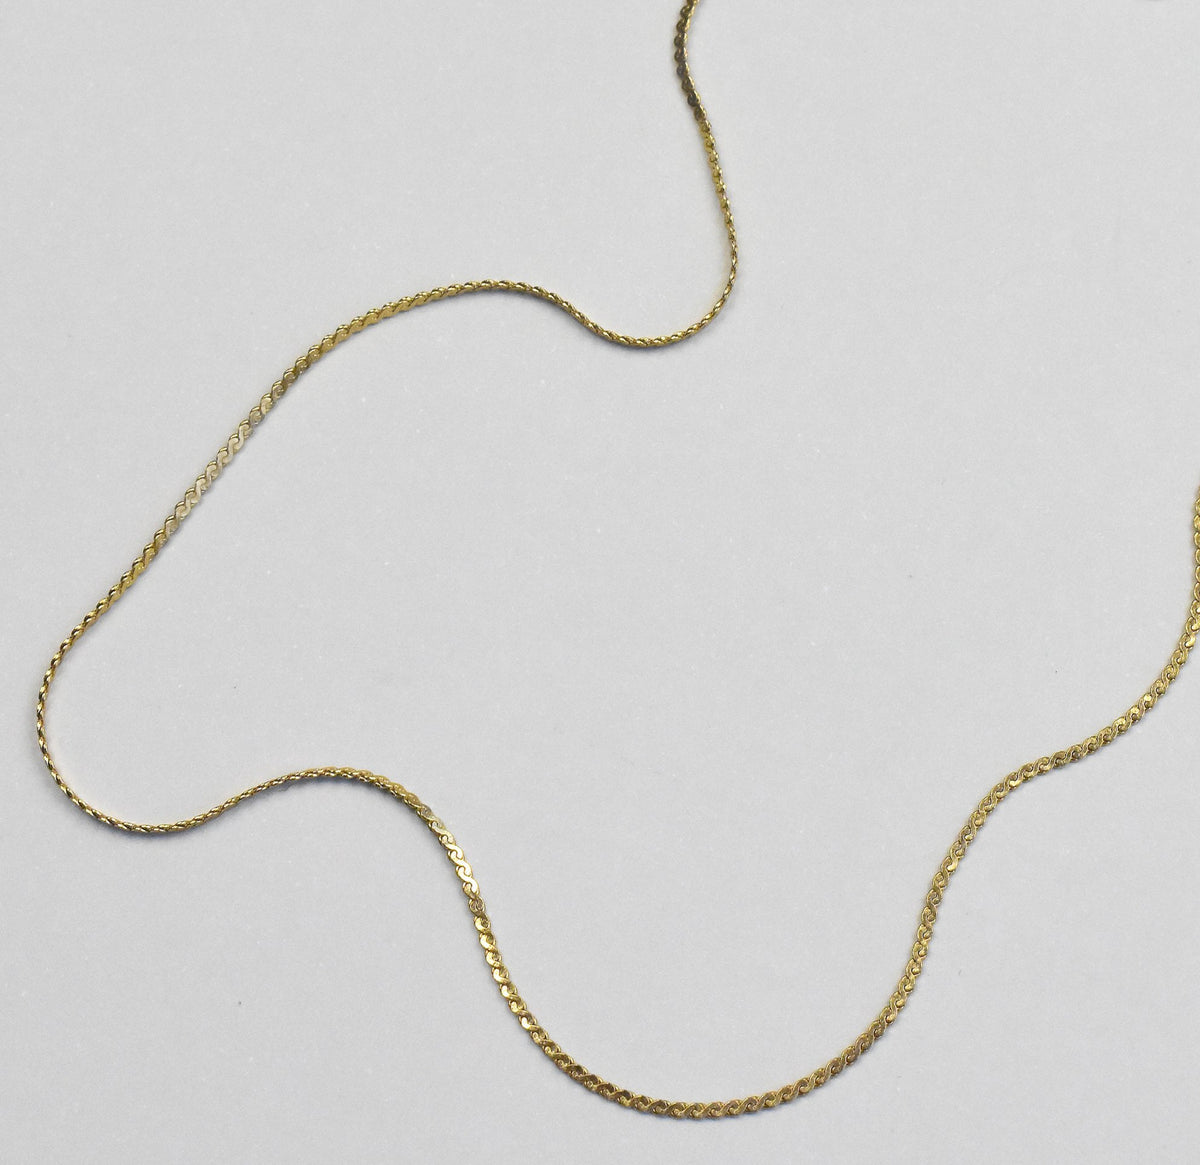 gold thin chain necklace adjustable